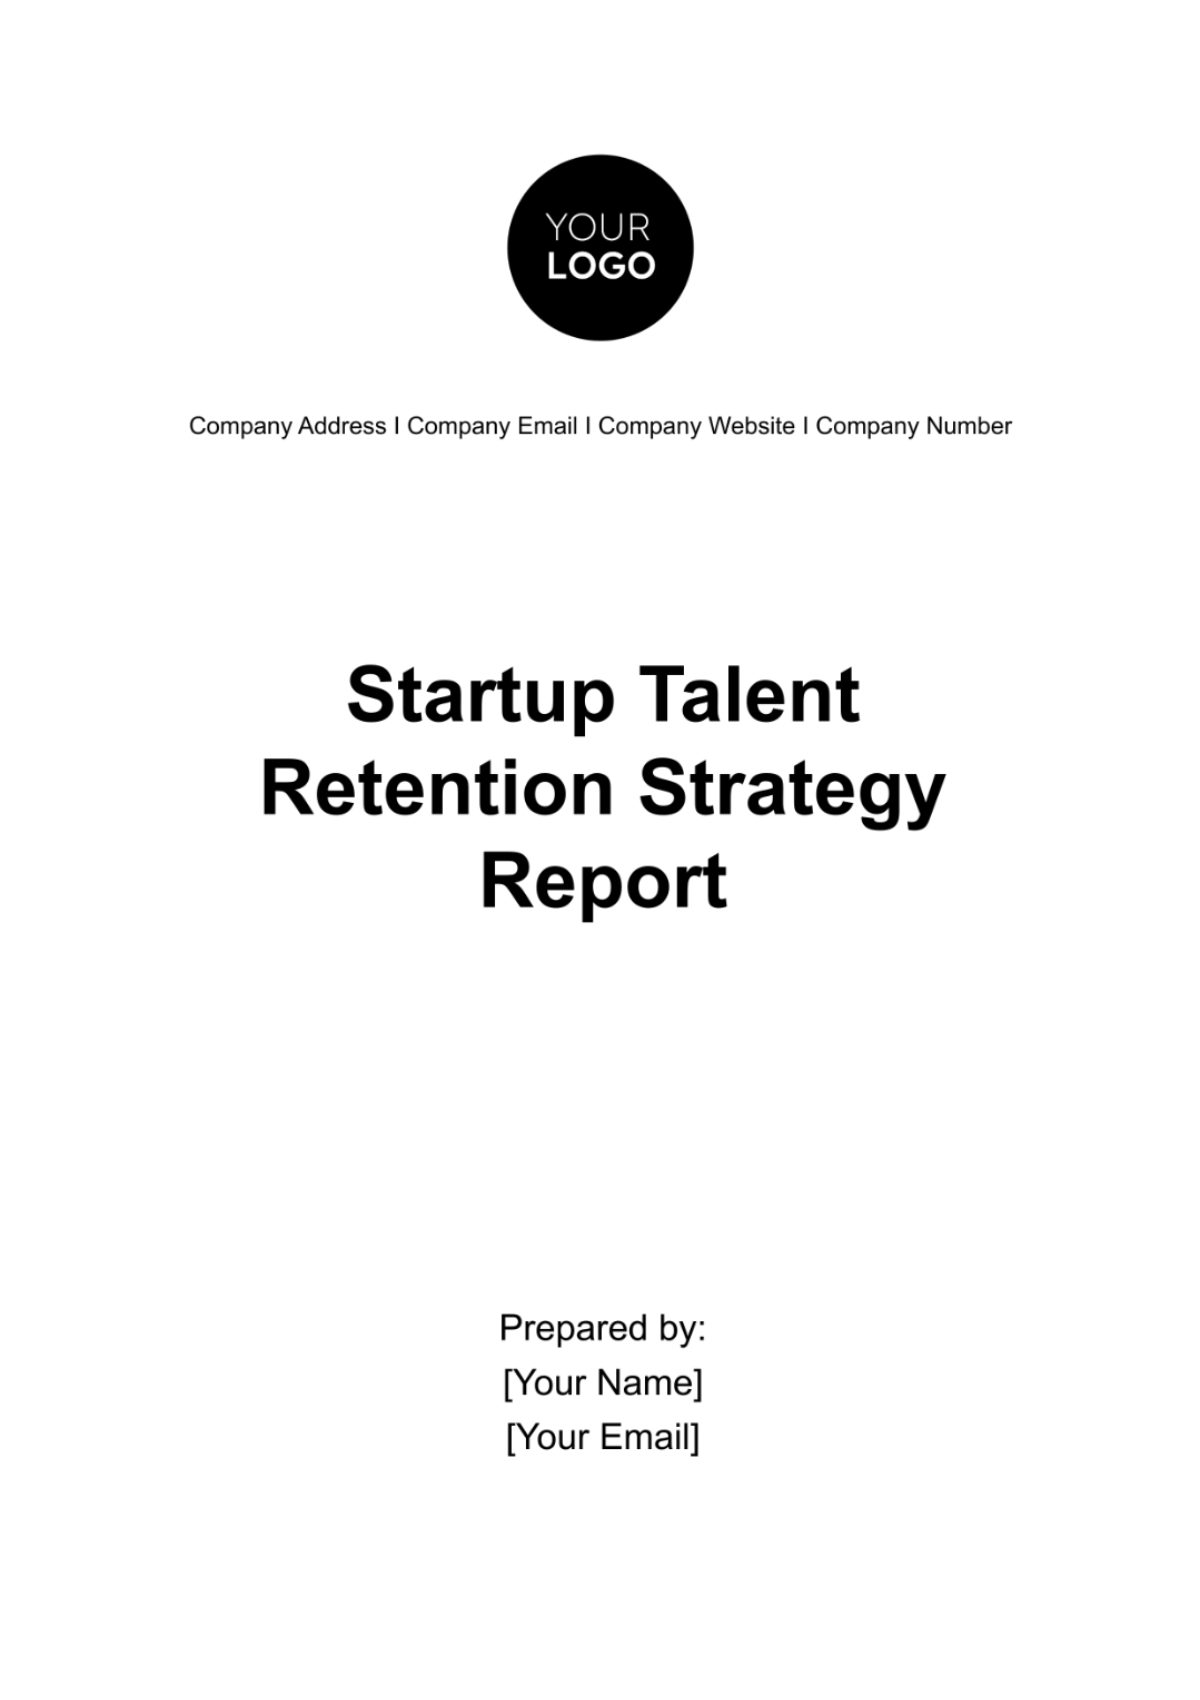 Startup Talent Retention Strategy Report Template